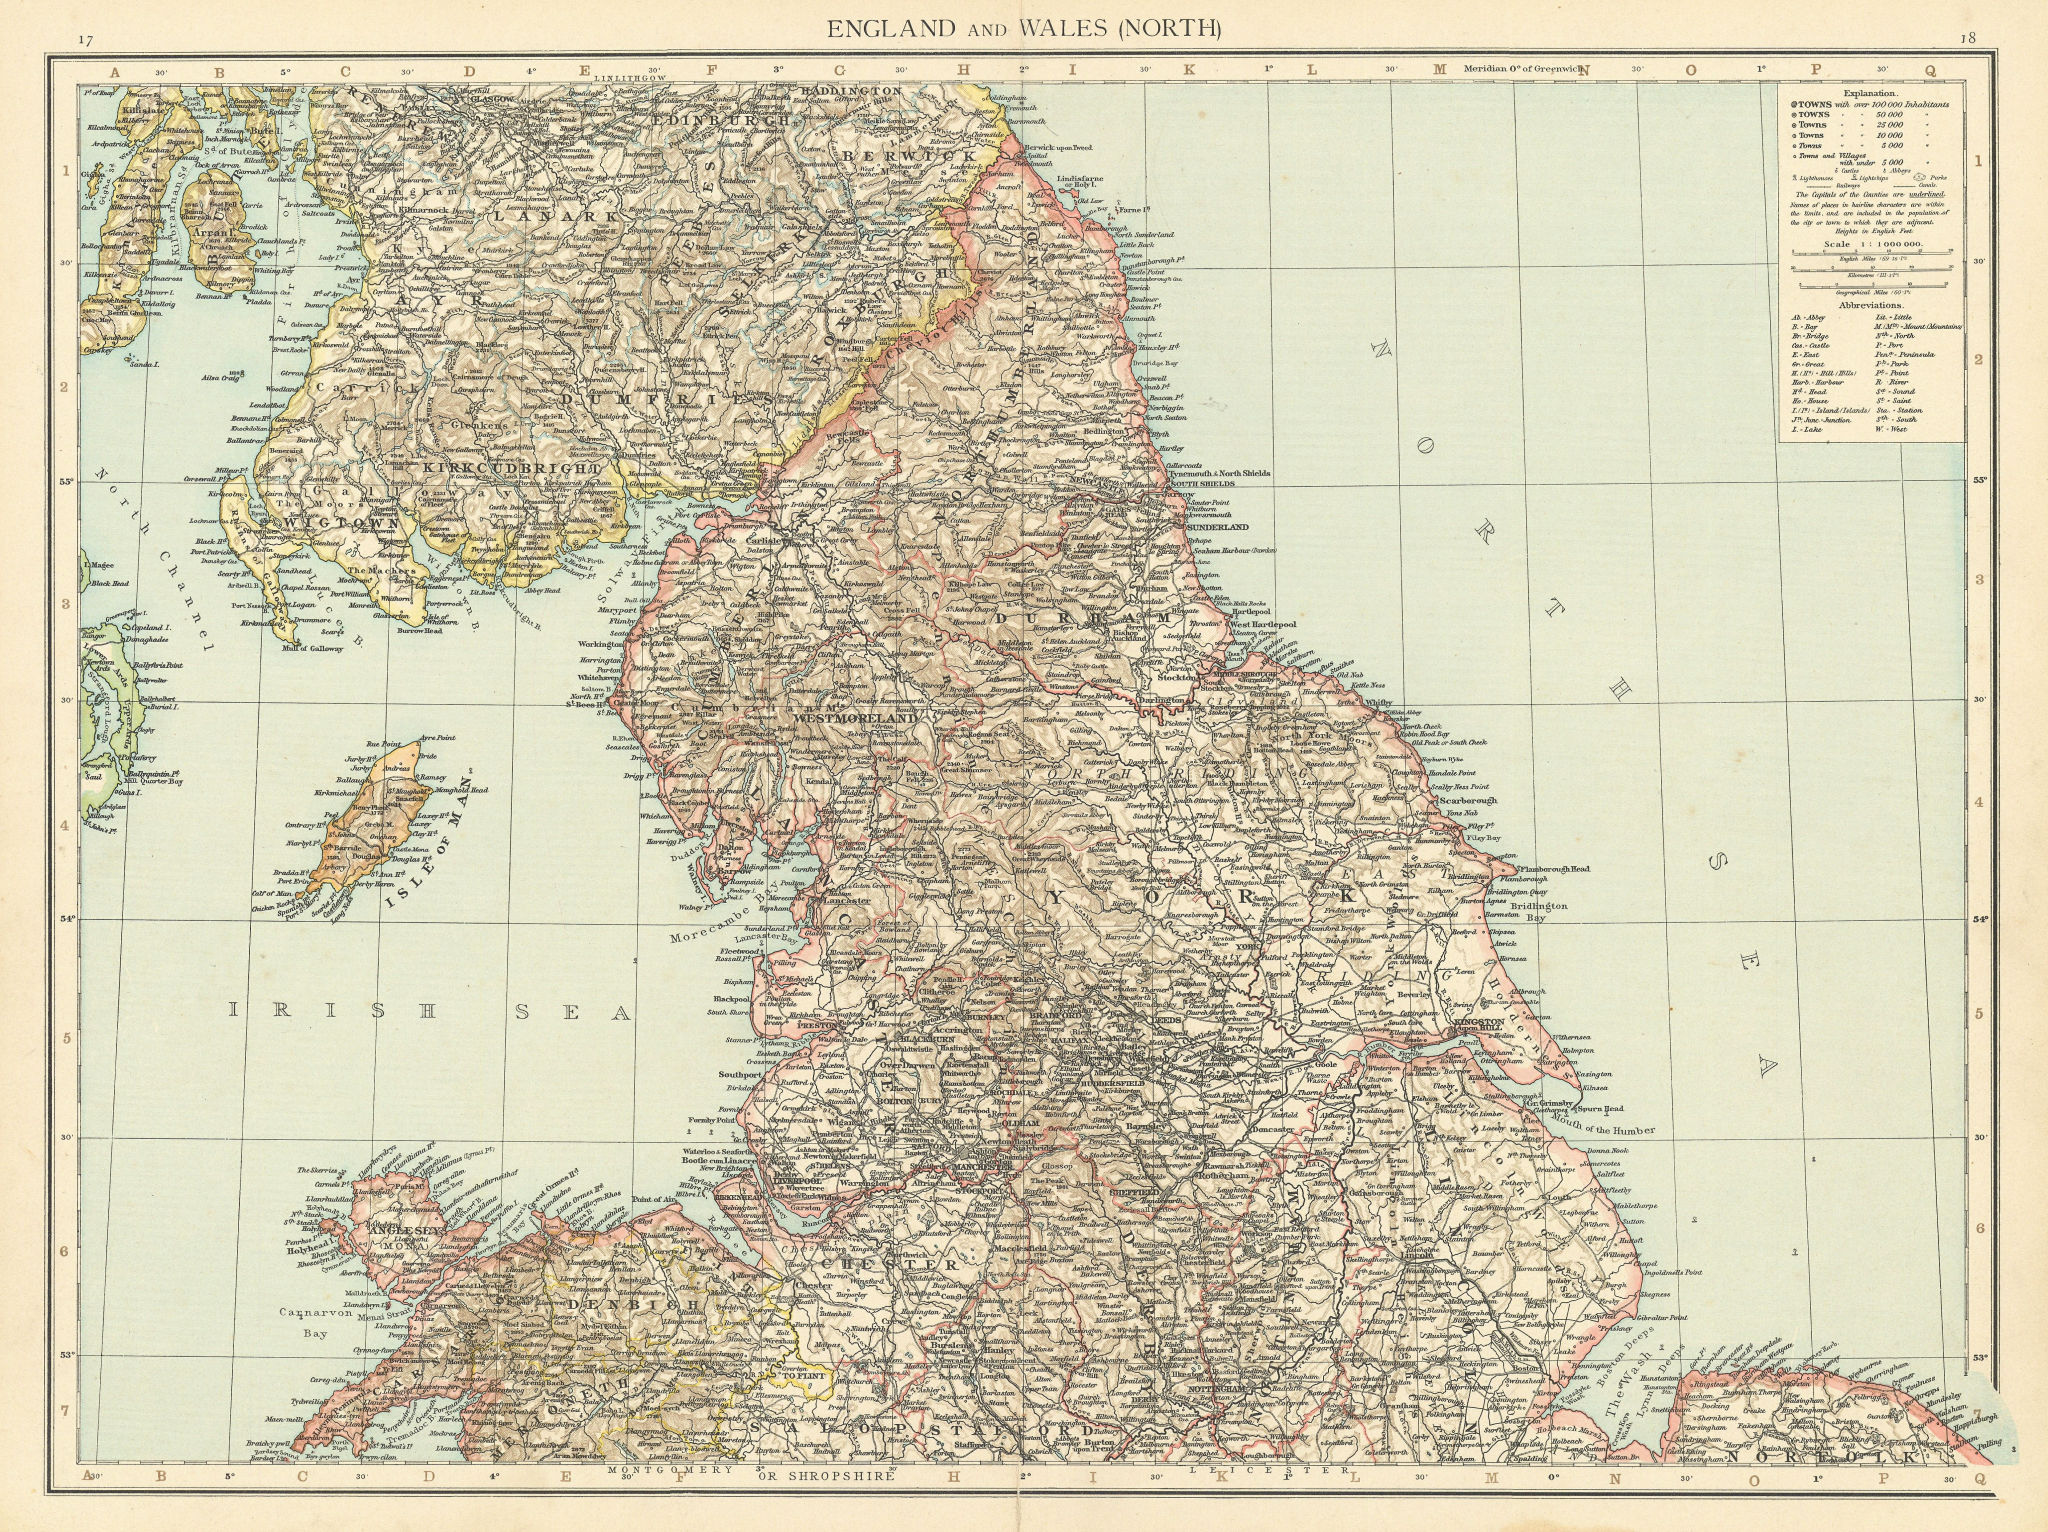 Associate Product England & Wales North. Yorkshire Lancashire Cumbria Lincs. THE TIMES 1895 map